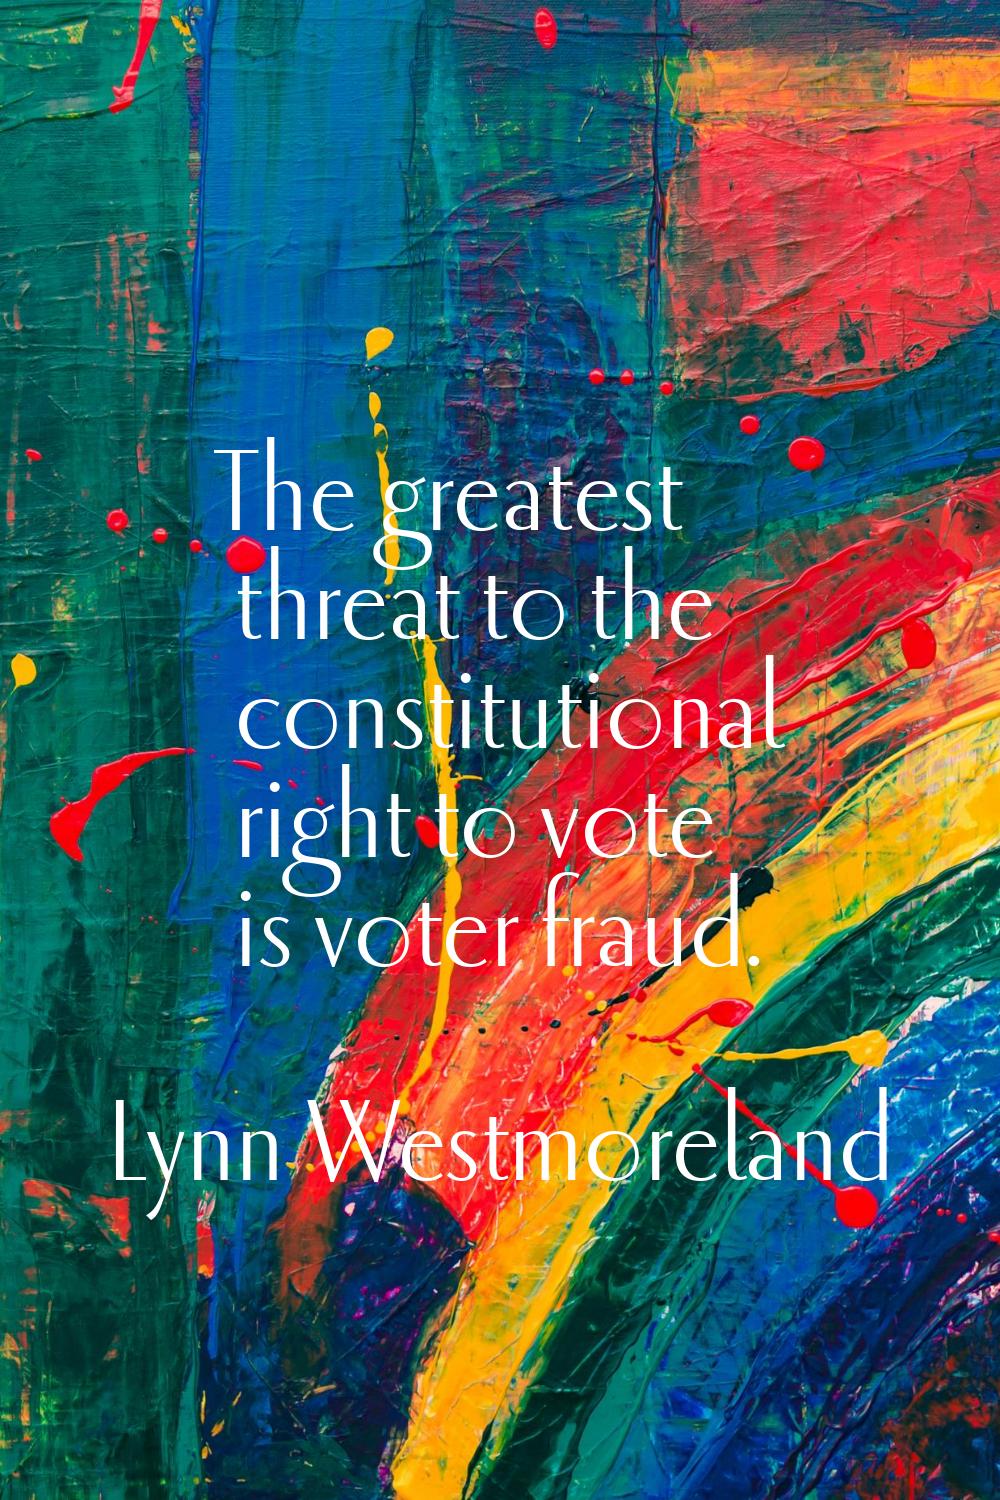 The greatest threat to the constitutional right to vote is voter fraud.